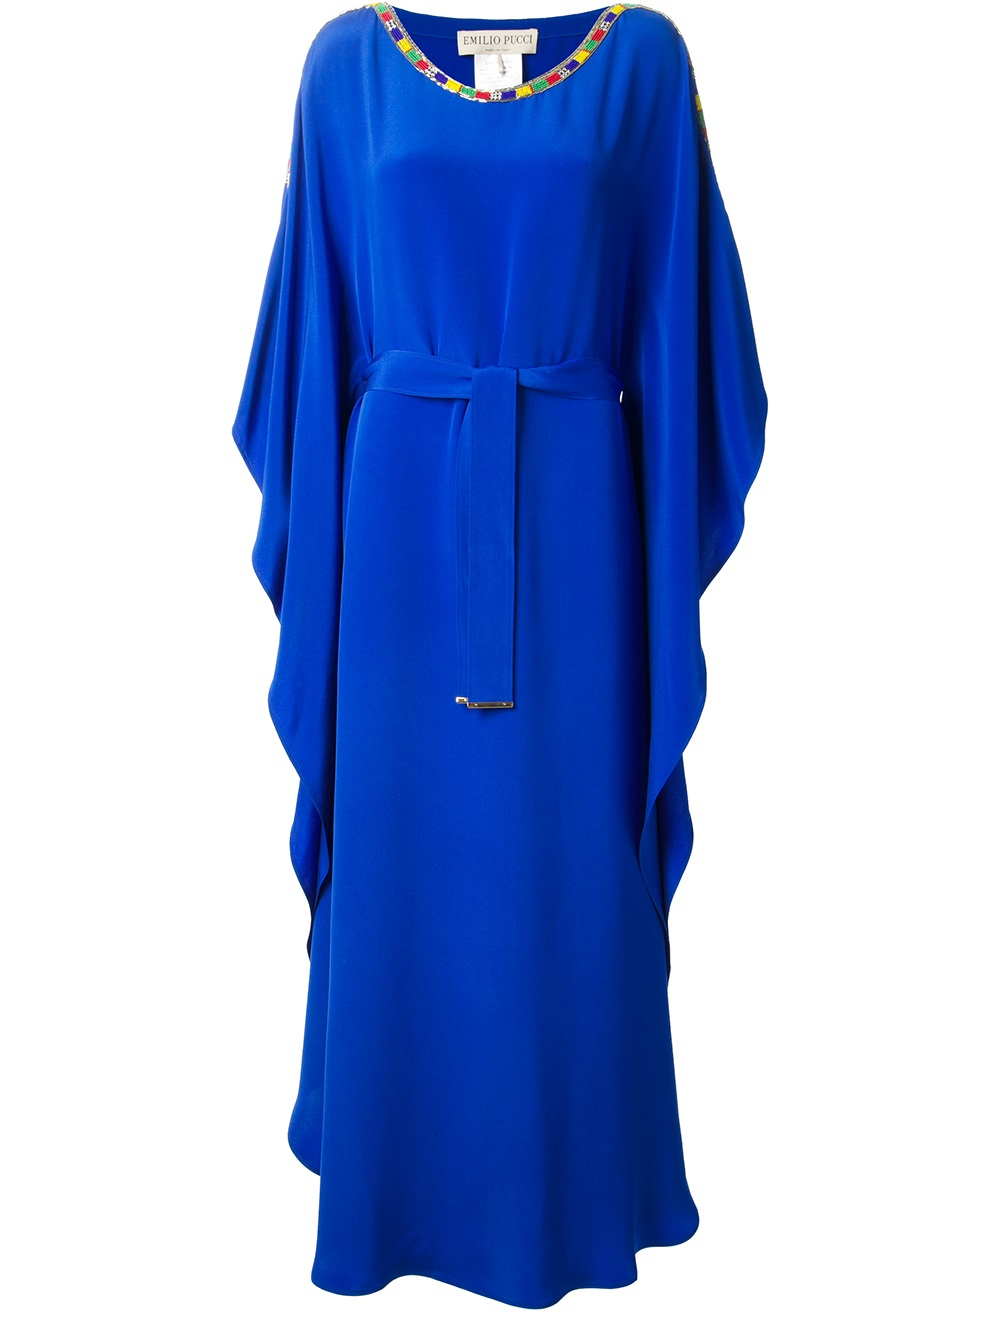 Emilio Pucci Beaded Kaftanstyle Gown in Blue | Lyst